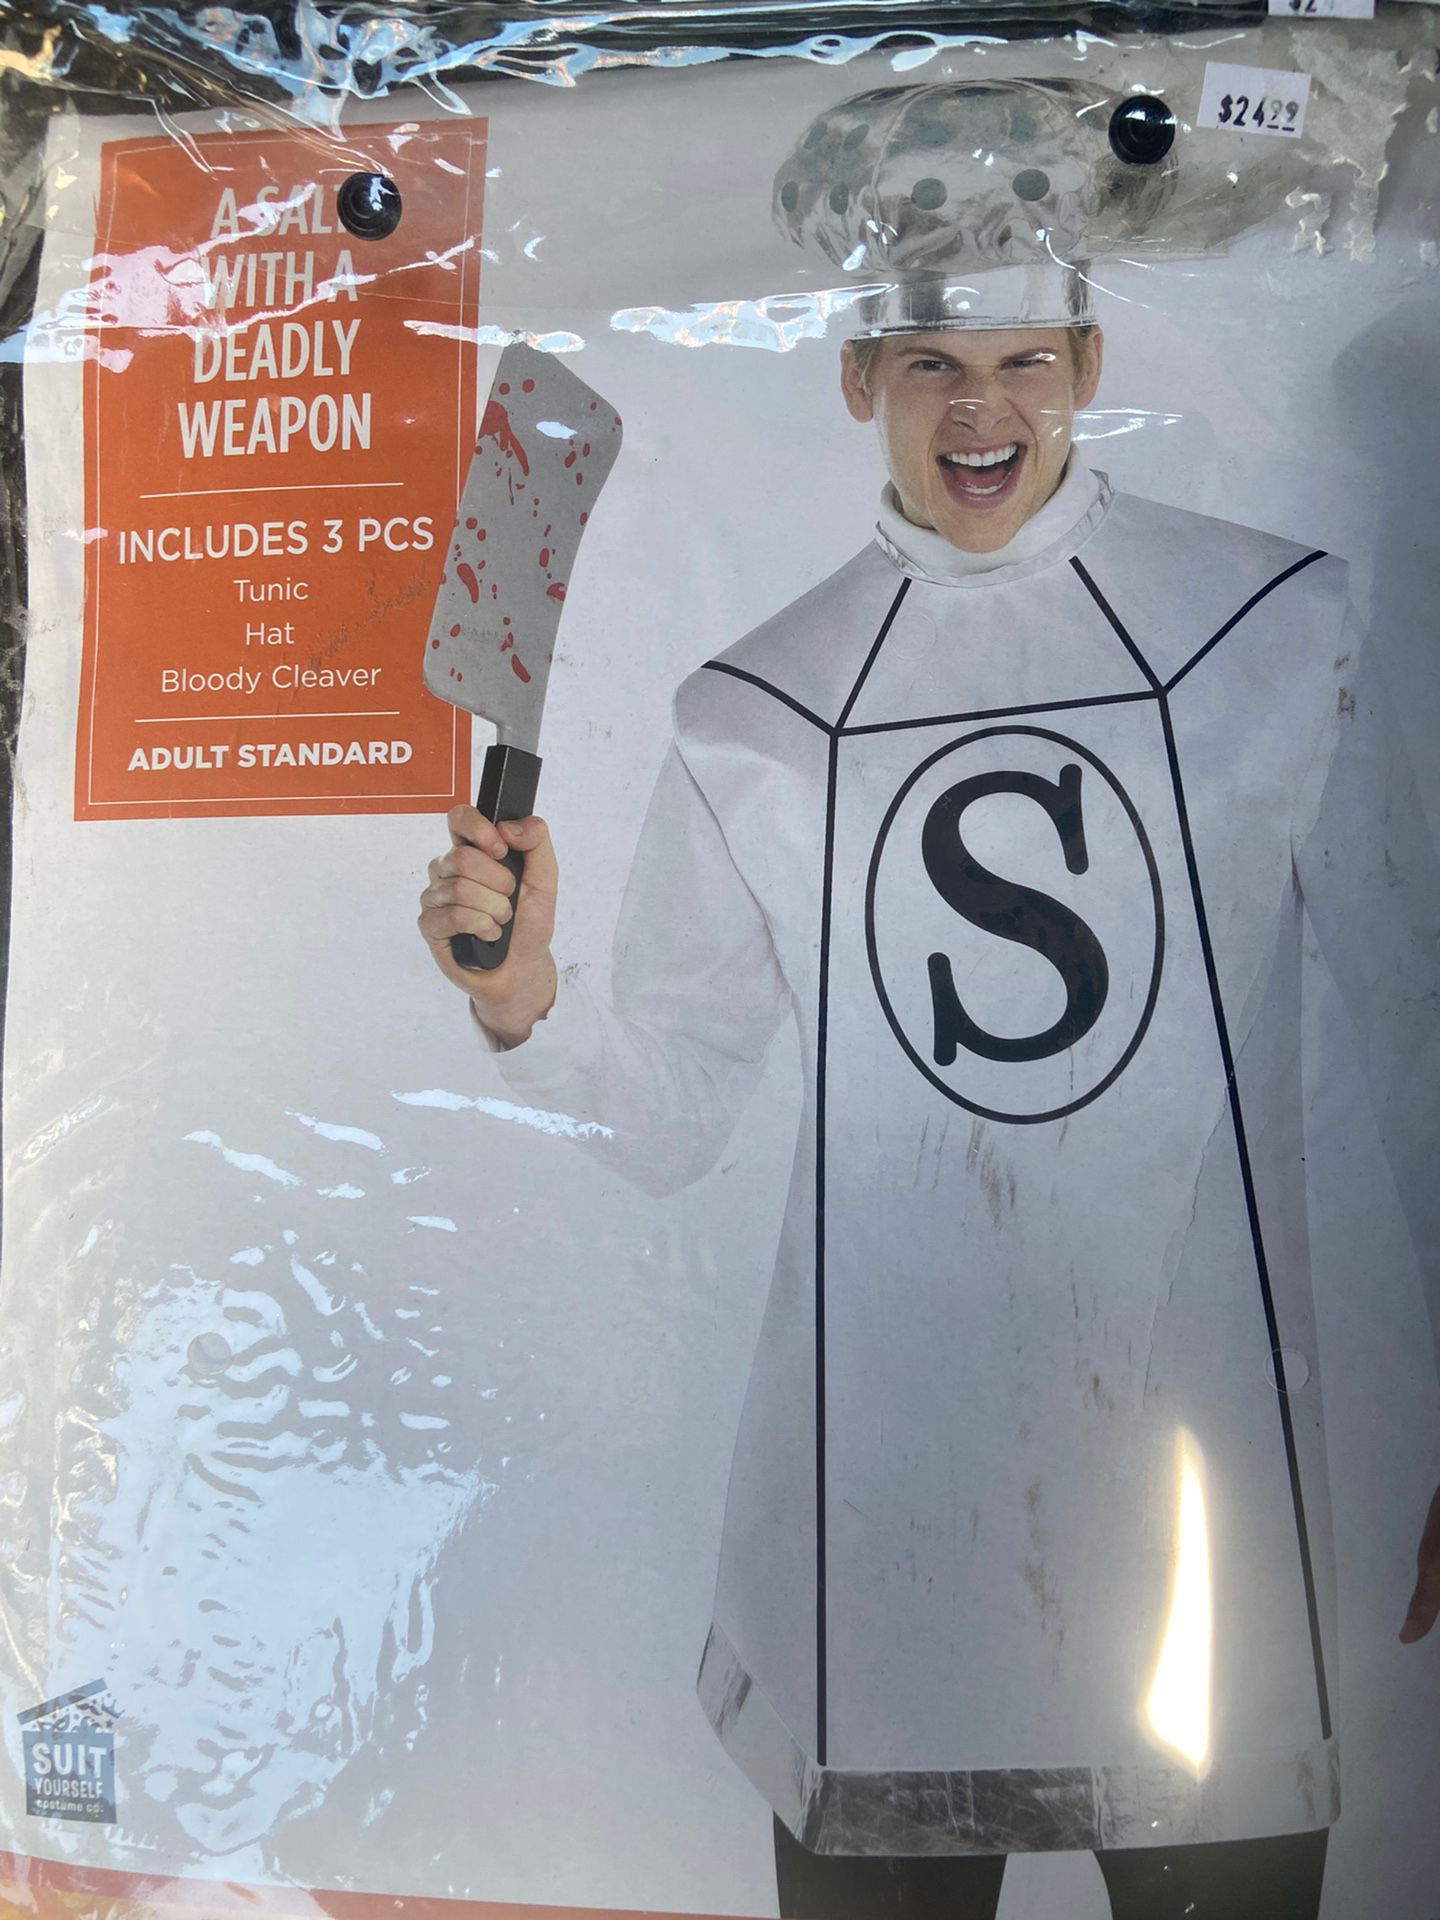 A Salt with a Deadly Weapon Costume 